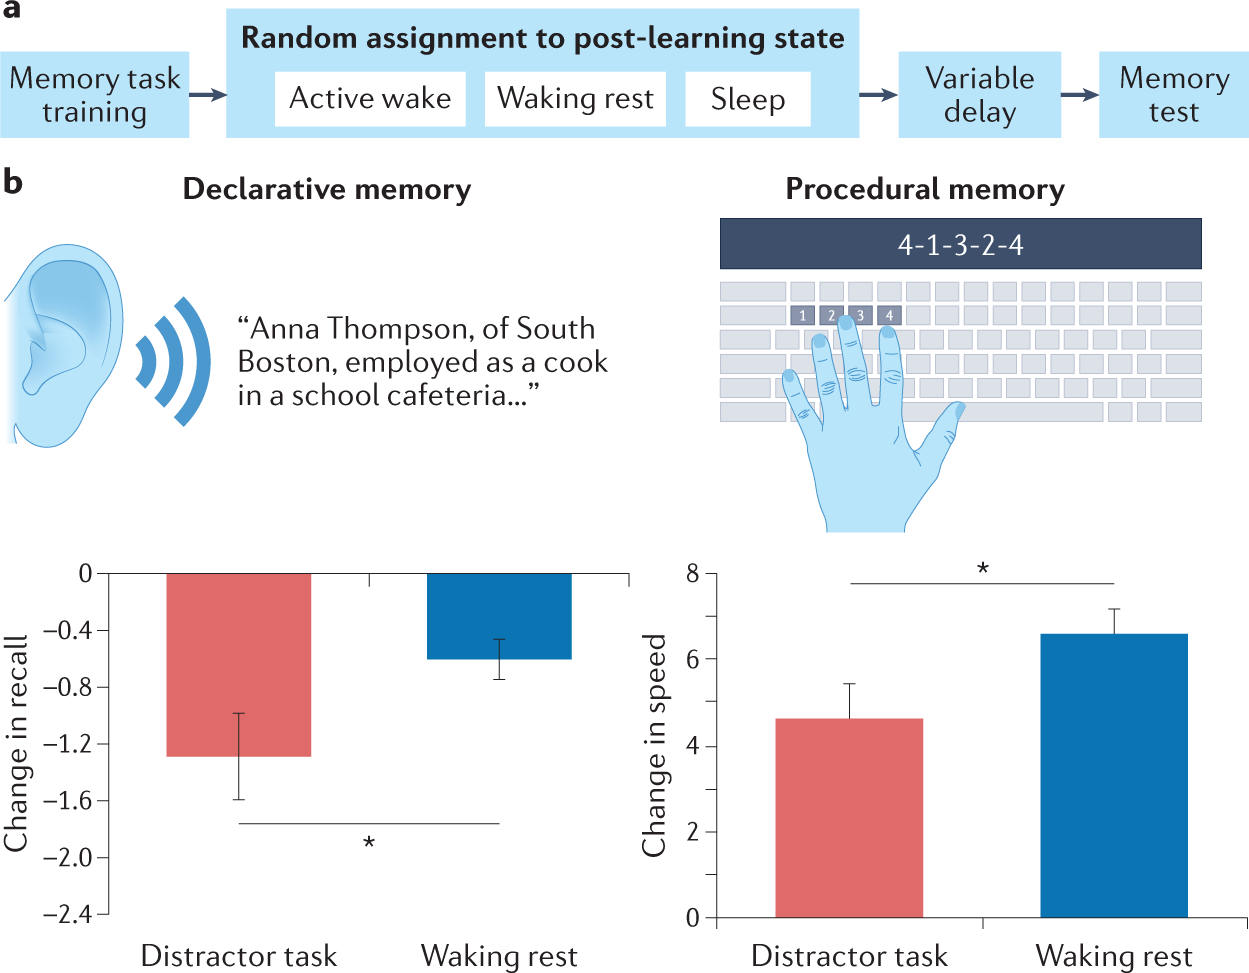 Offline memory consolidation during waking rest